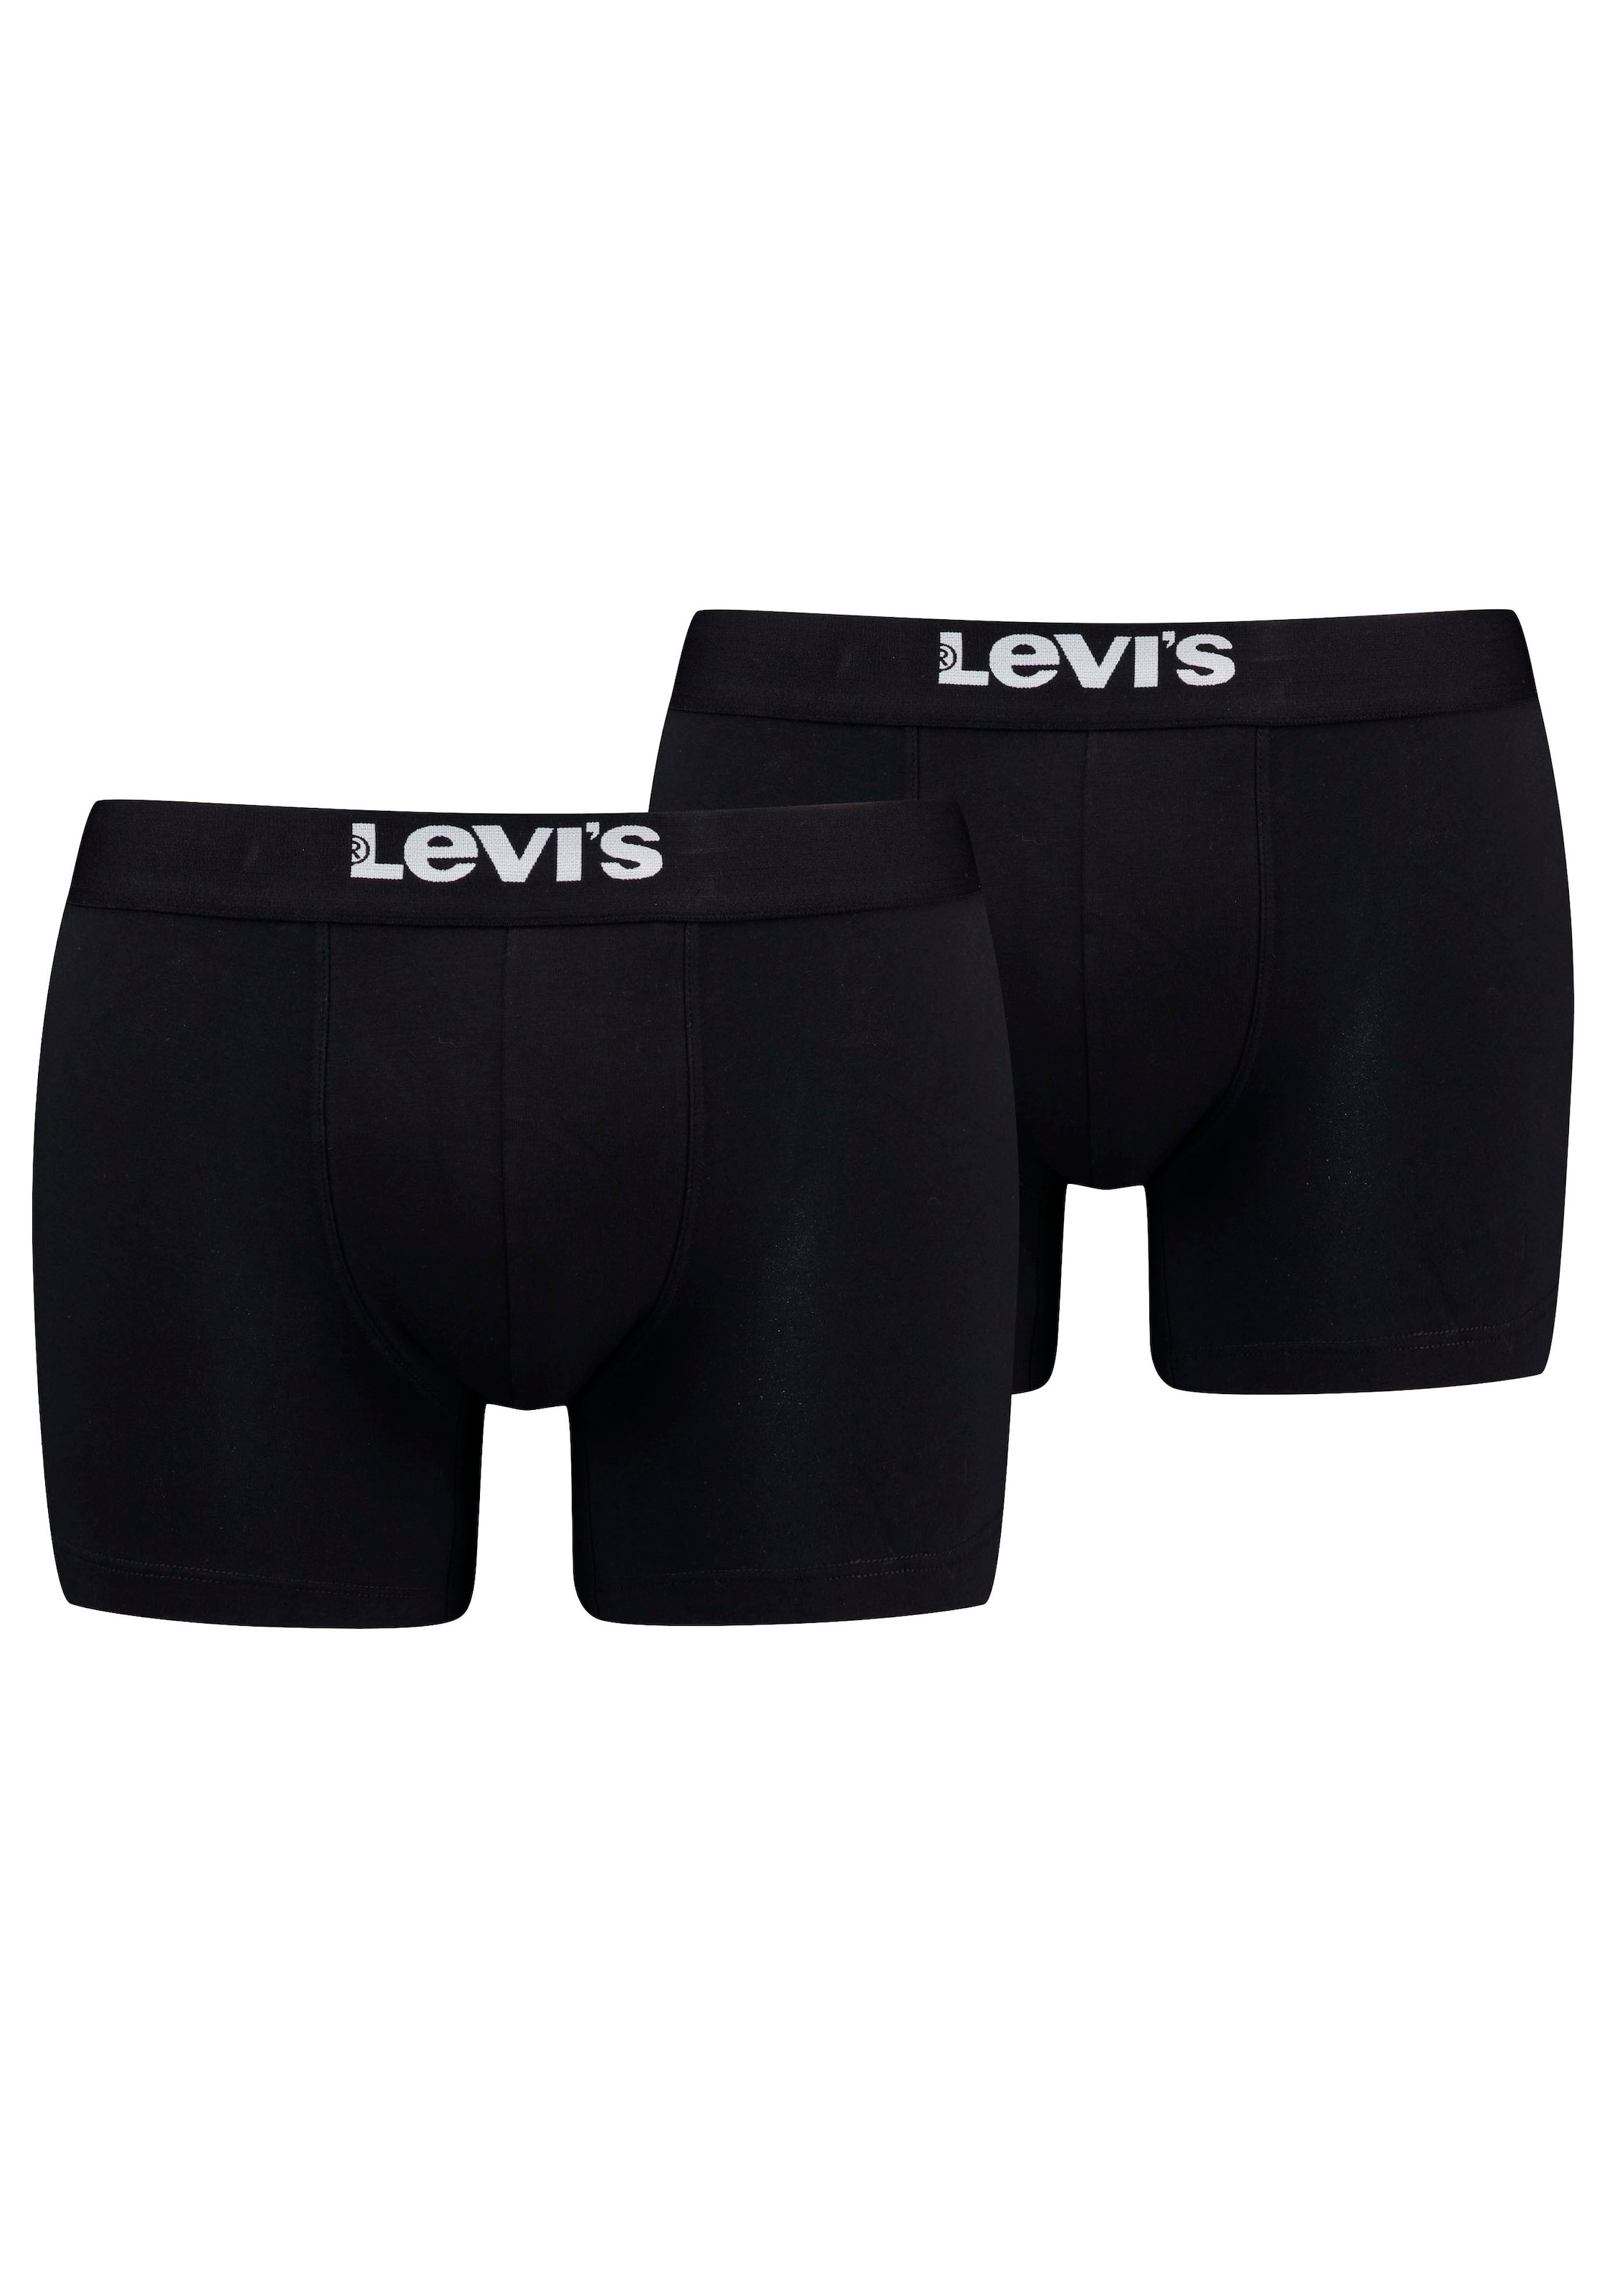 Boxershorts, (Packung, 2 St.), LEVIS MEN SOLID BASIC BOXER BRIEF ORGANIC CO 2P